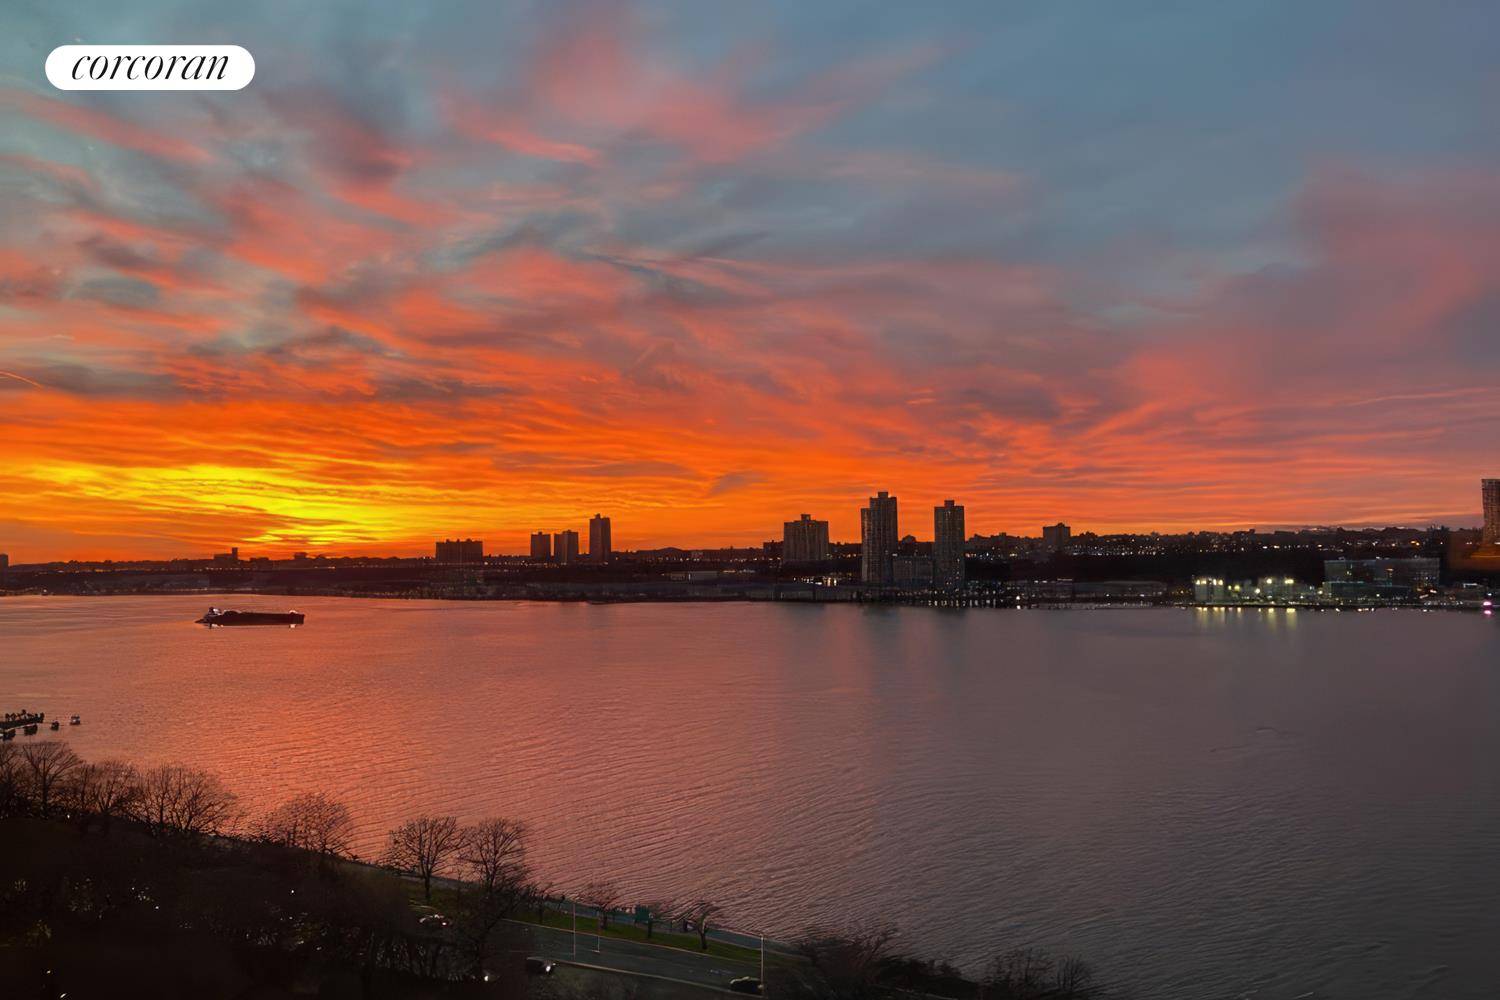 Apartment 12B is a extraordinary, sun filled mint 9 room Hudson River view home high atop the city and perfectly positioned across from Riverside Park in one of the Upper ...